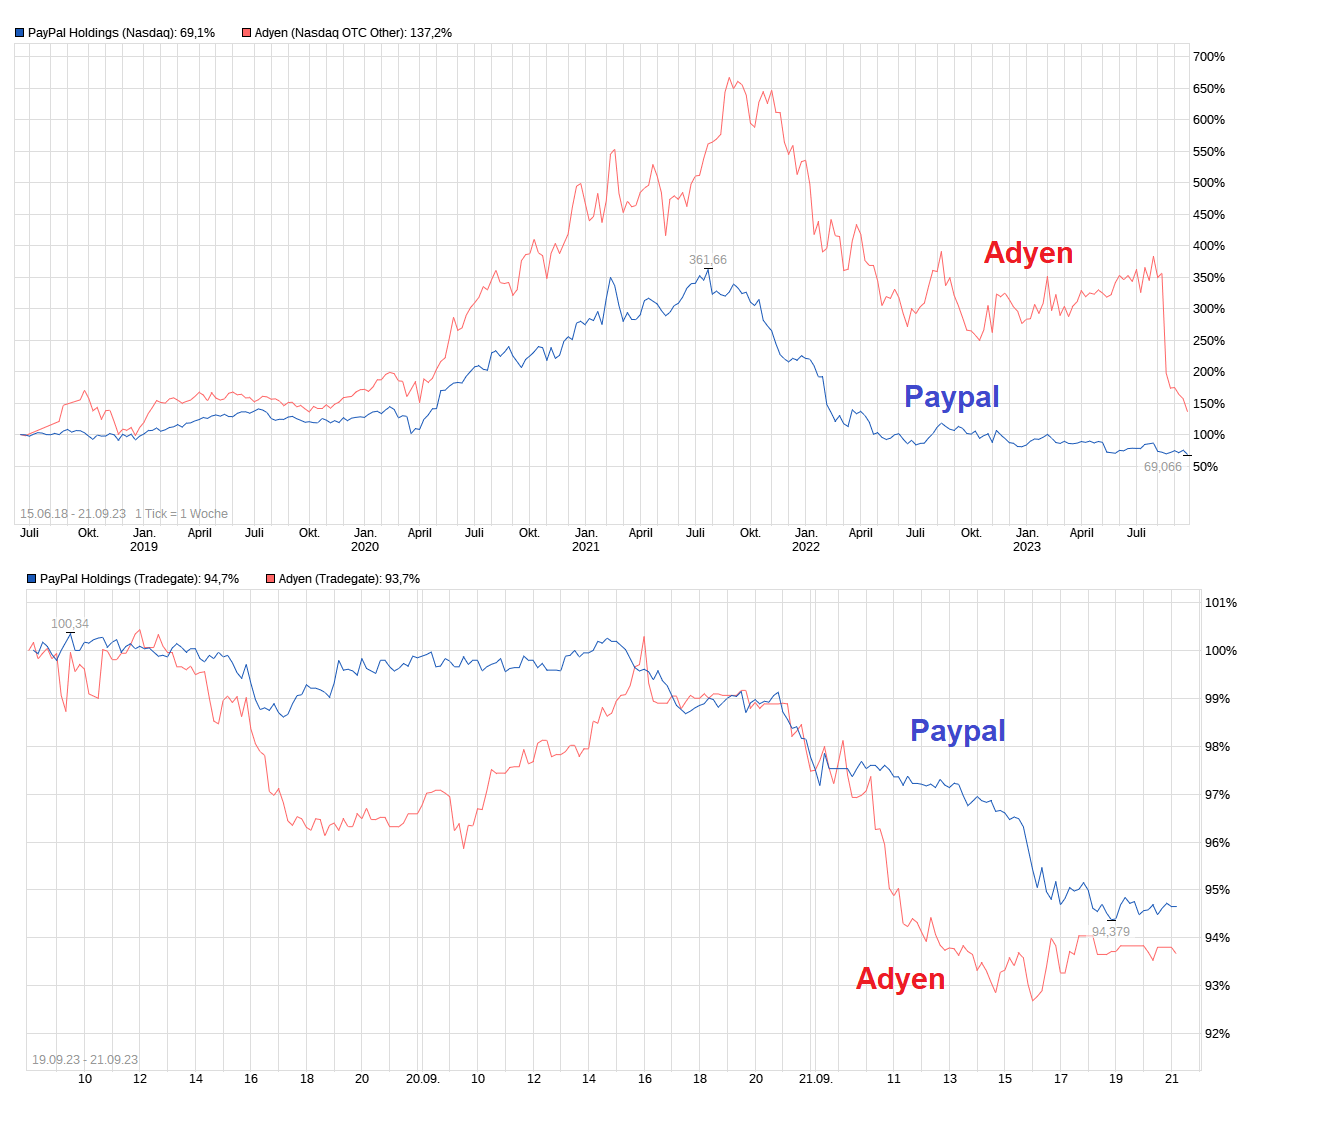 chart_all_paypalholdings.png